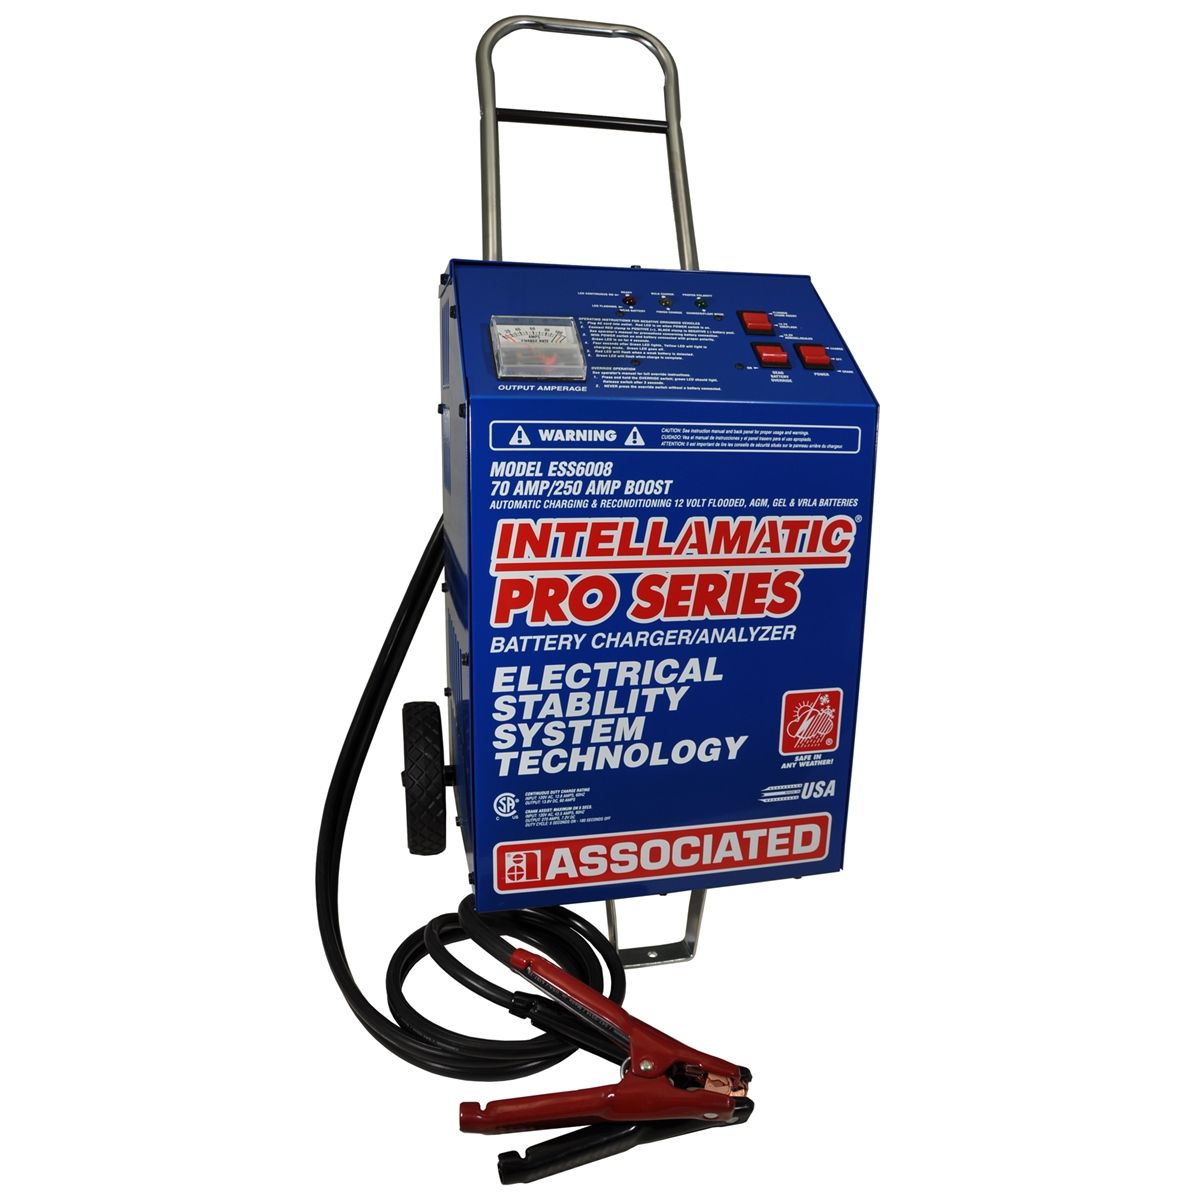 Fully Automatic 12V Intellamatic Battery Charger...